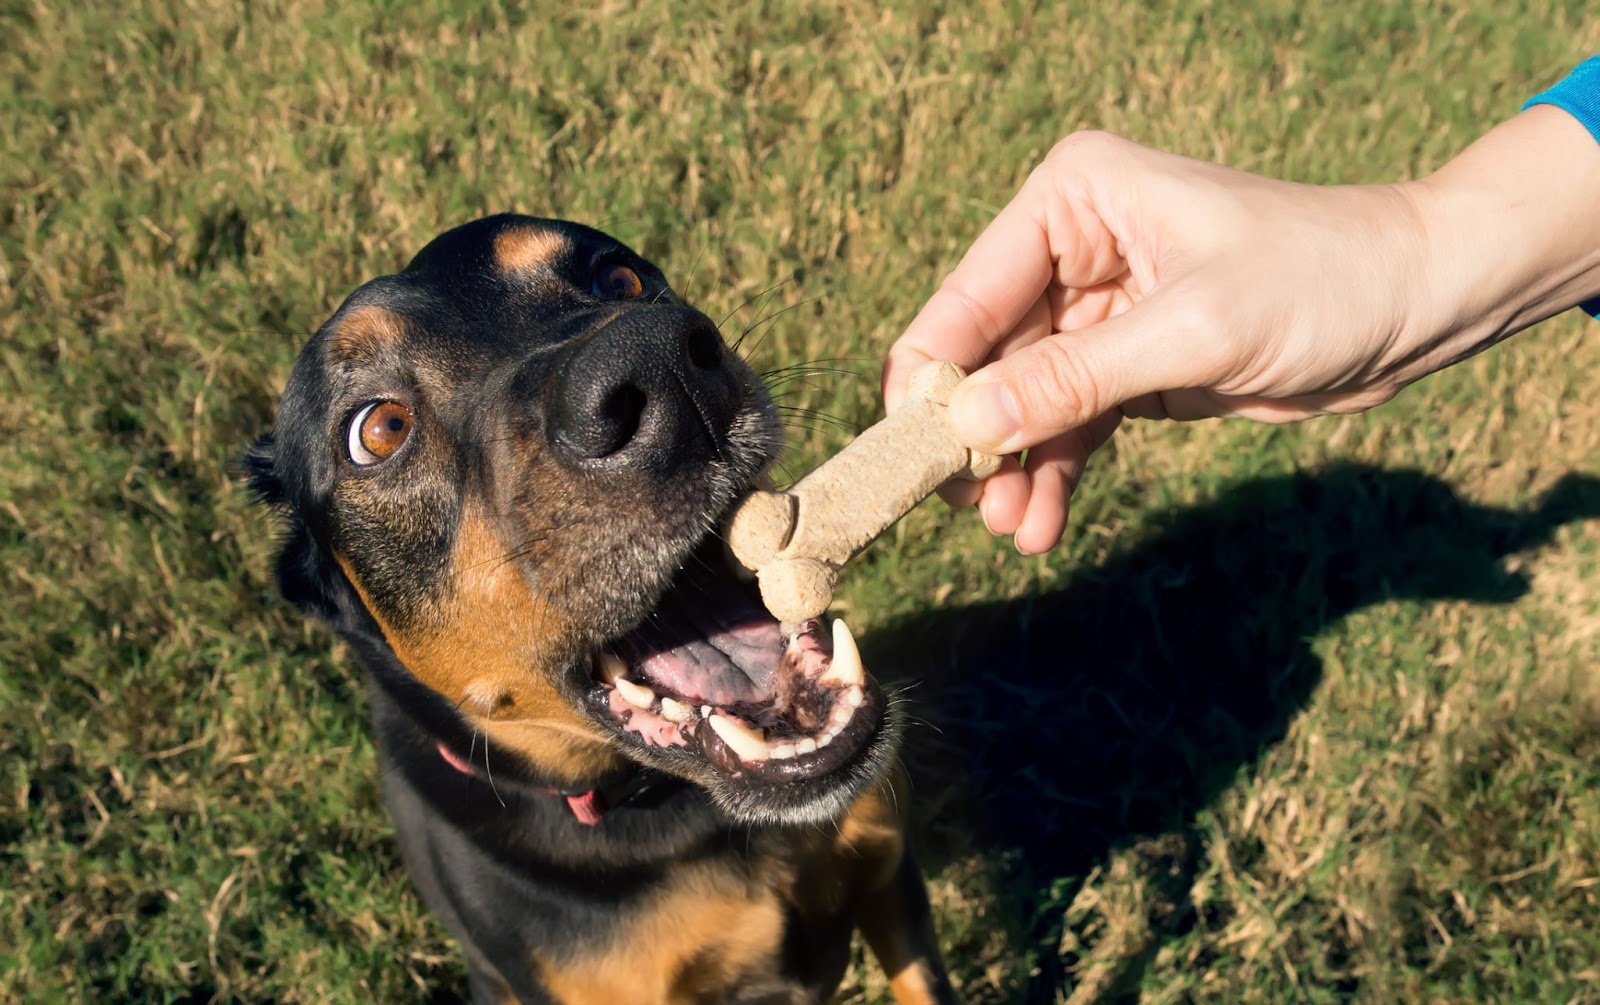 Dog reaching for a tasty bone as a reward in his hand clamped